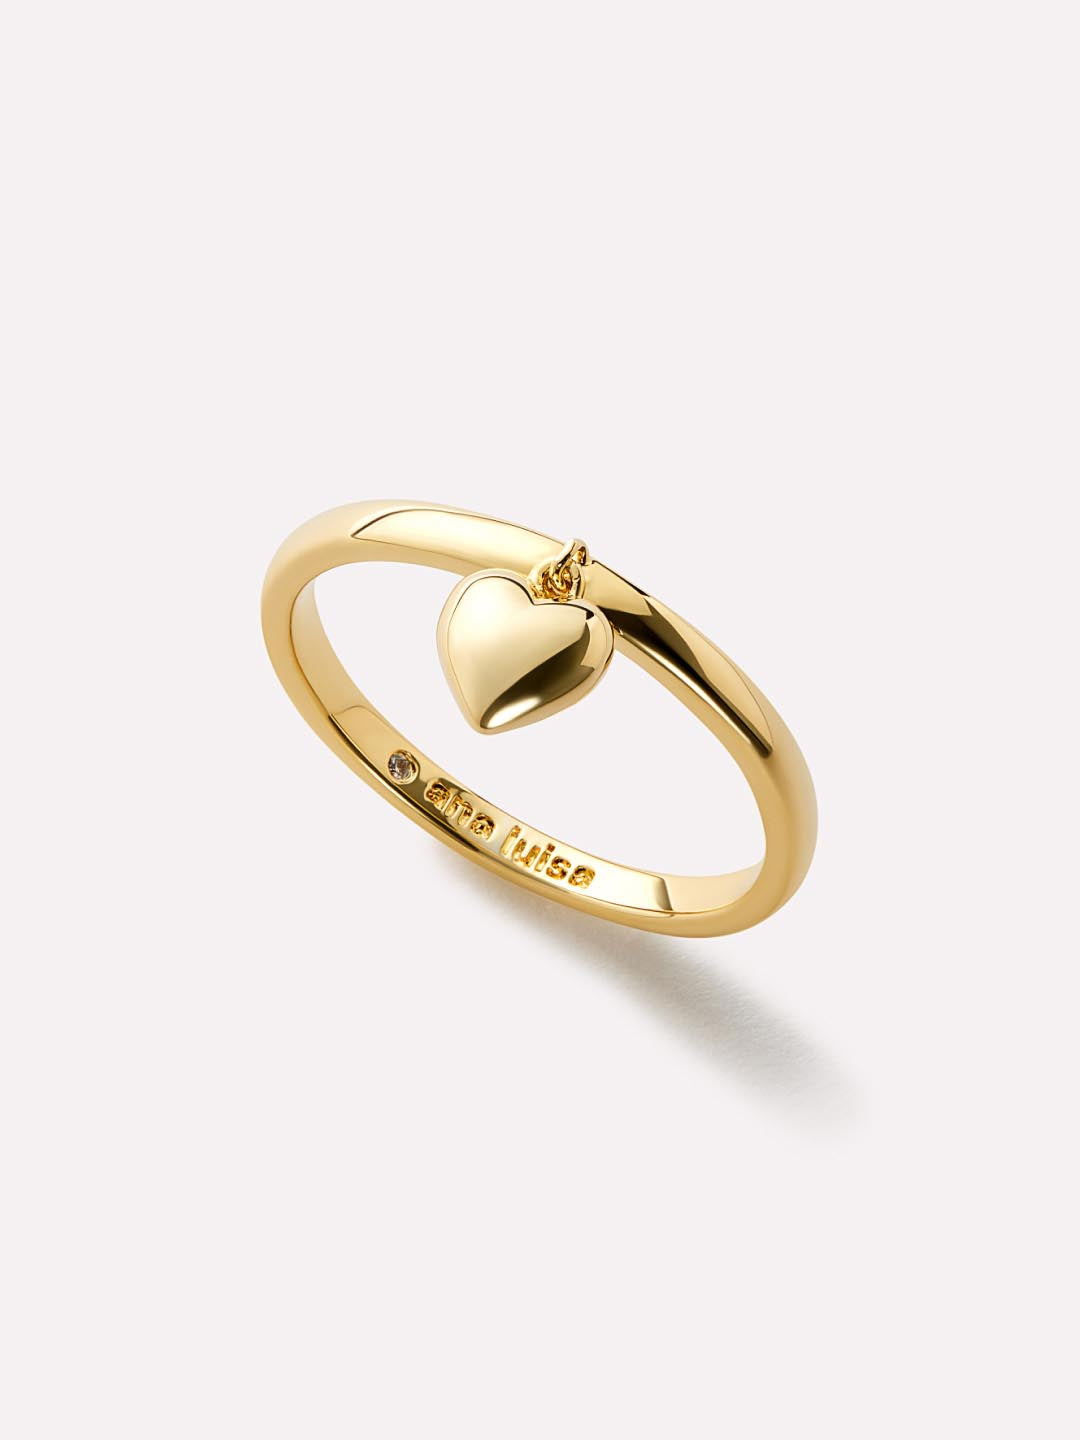 Heart Ring - Leia | Ana Luisa | Online Jewelry Store At Prices You'll Love